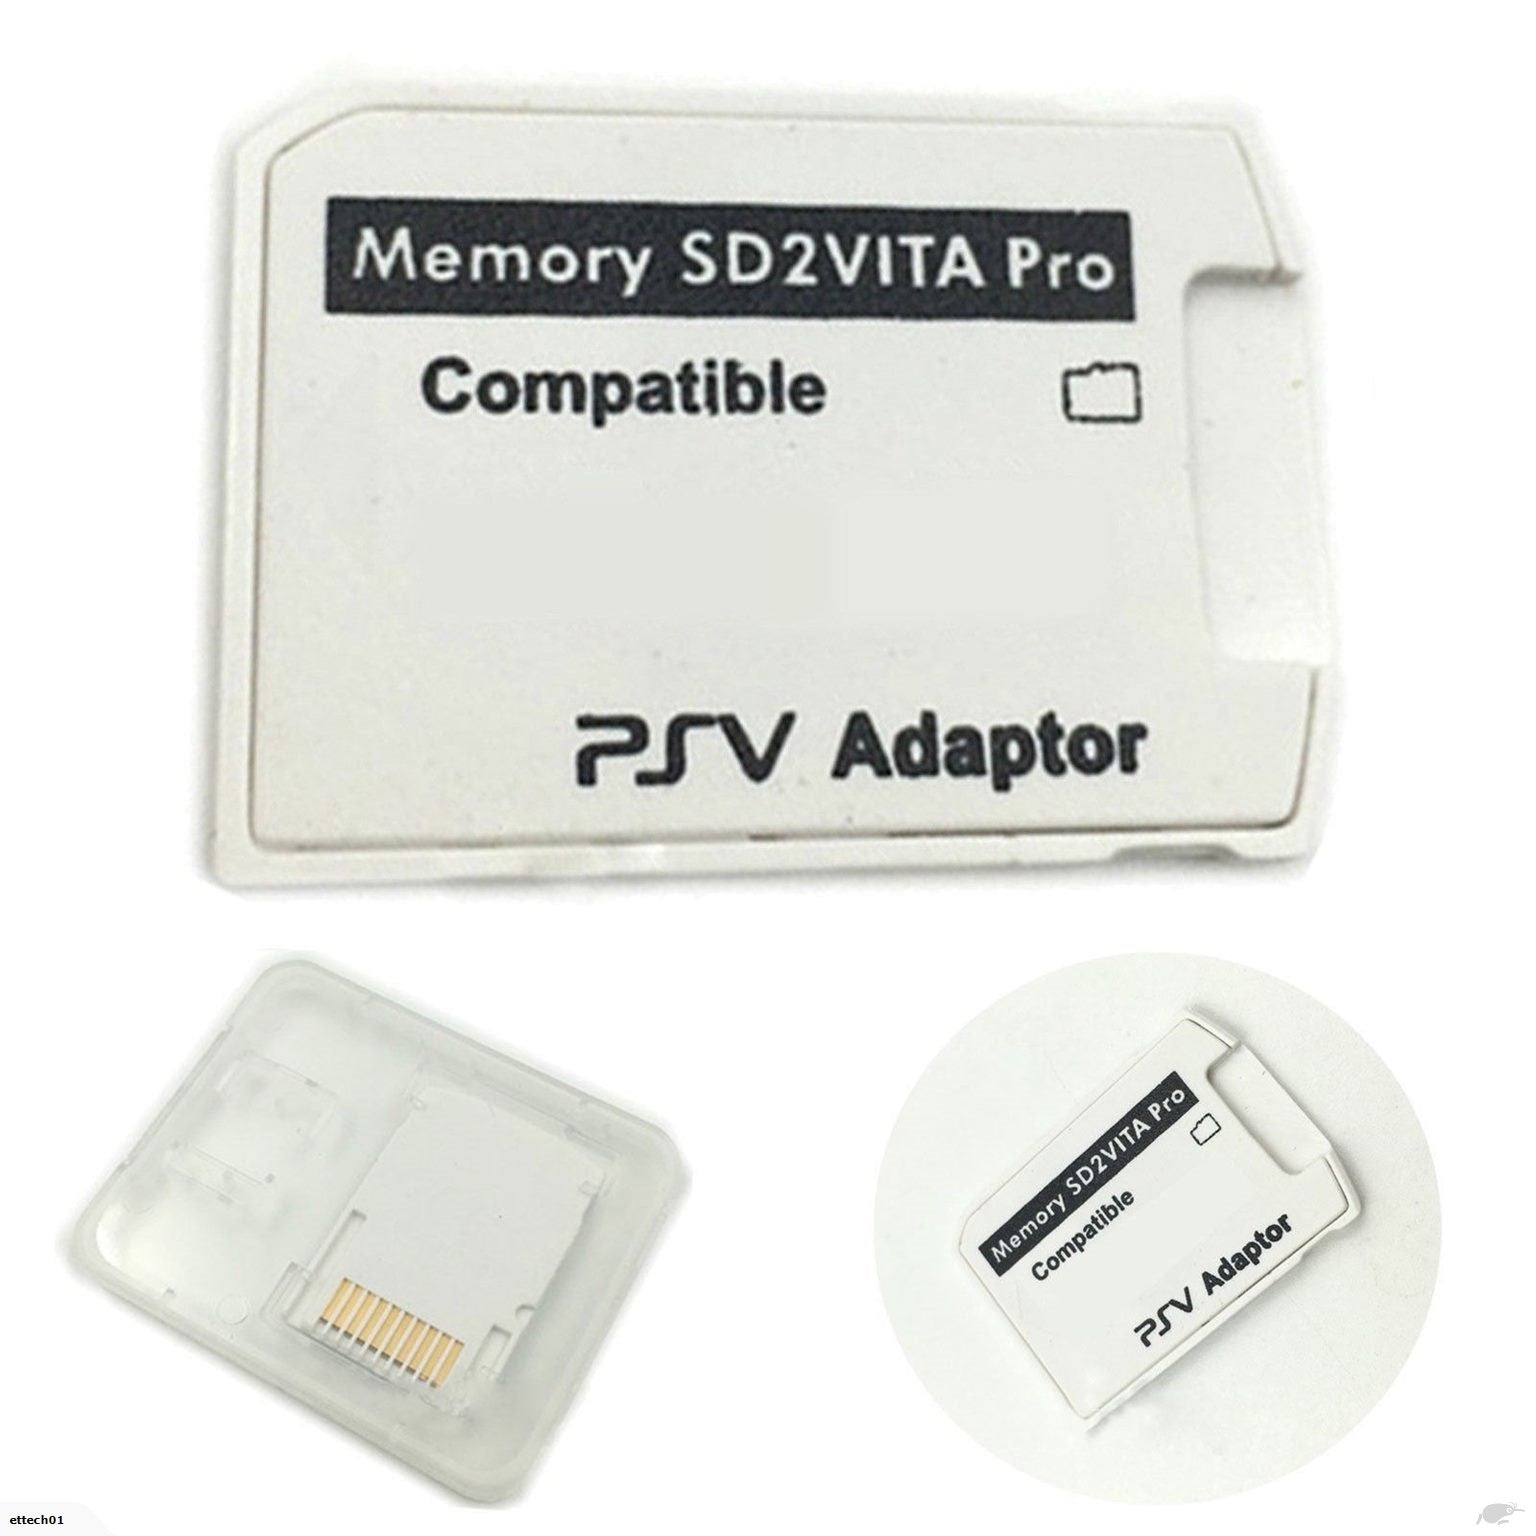 What's the maximum memory that works with the SDVita adapter? The